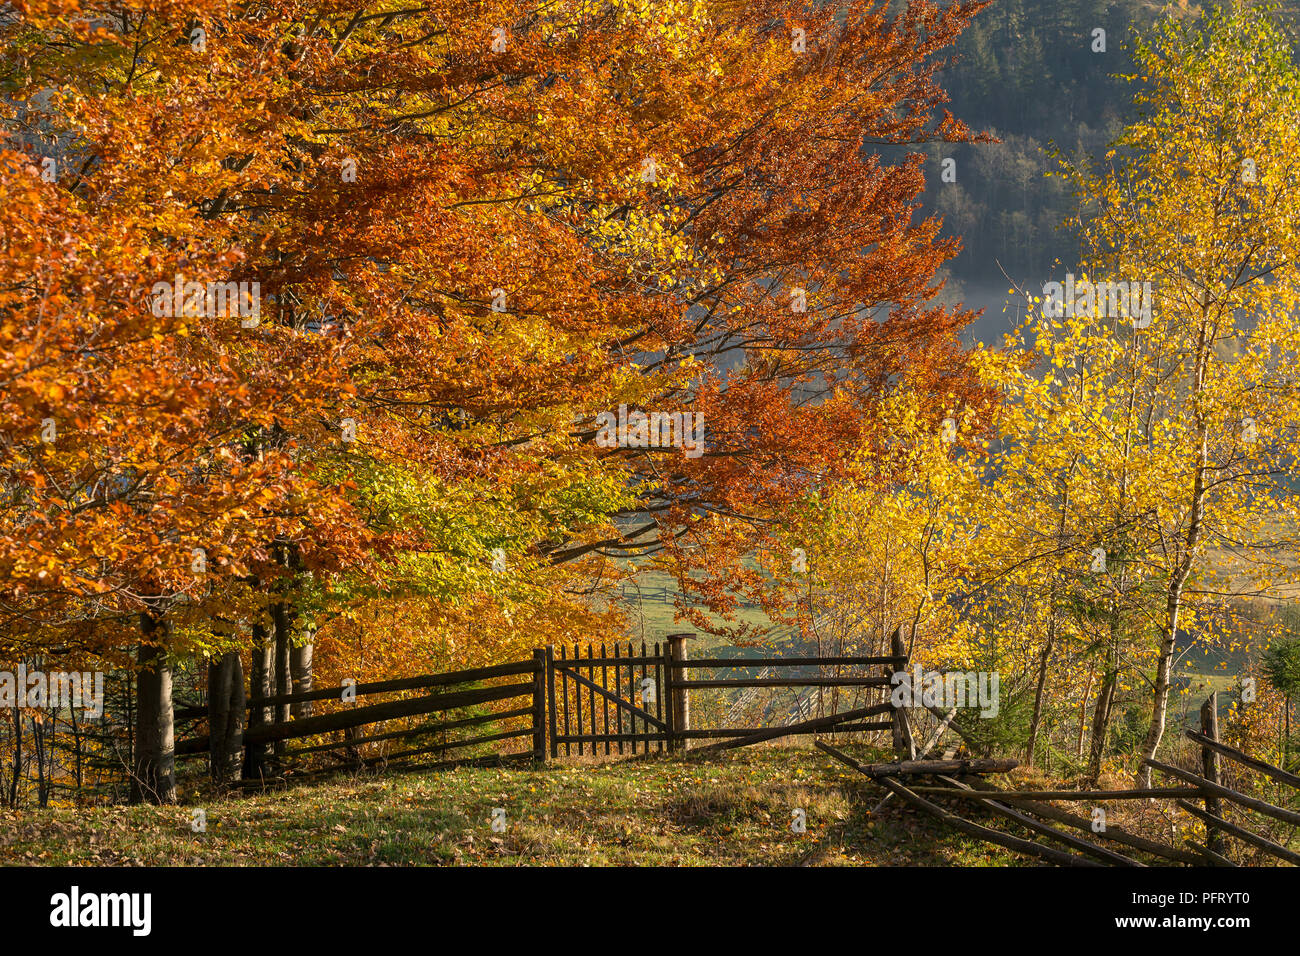 Beautiful colorful morning scene with autumn trees in Carpathian mountains, Ukraine. Orange and yellow leaves close up view at sunrise Stock Photo